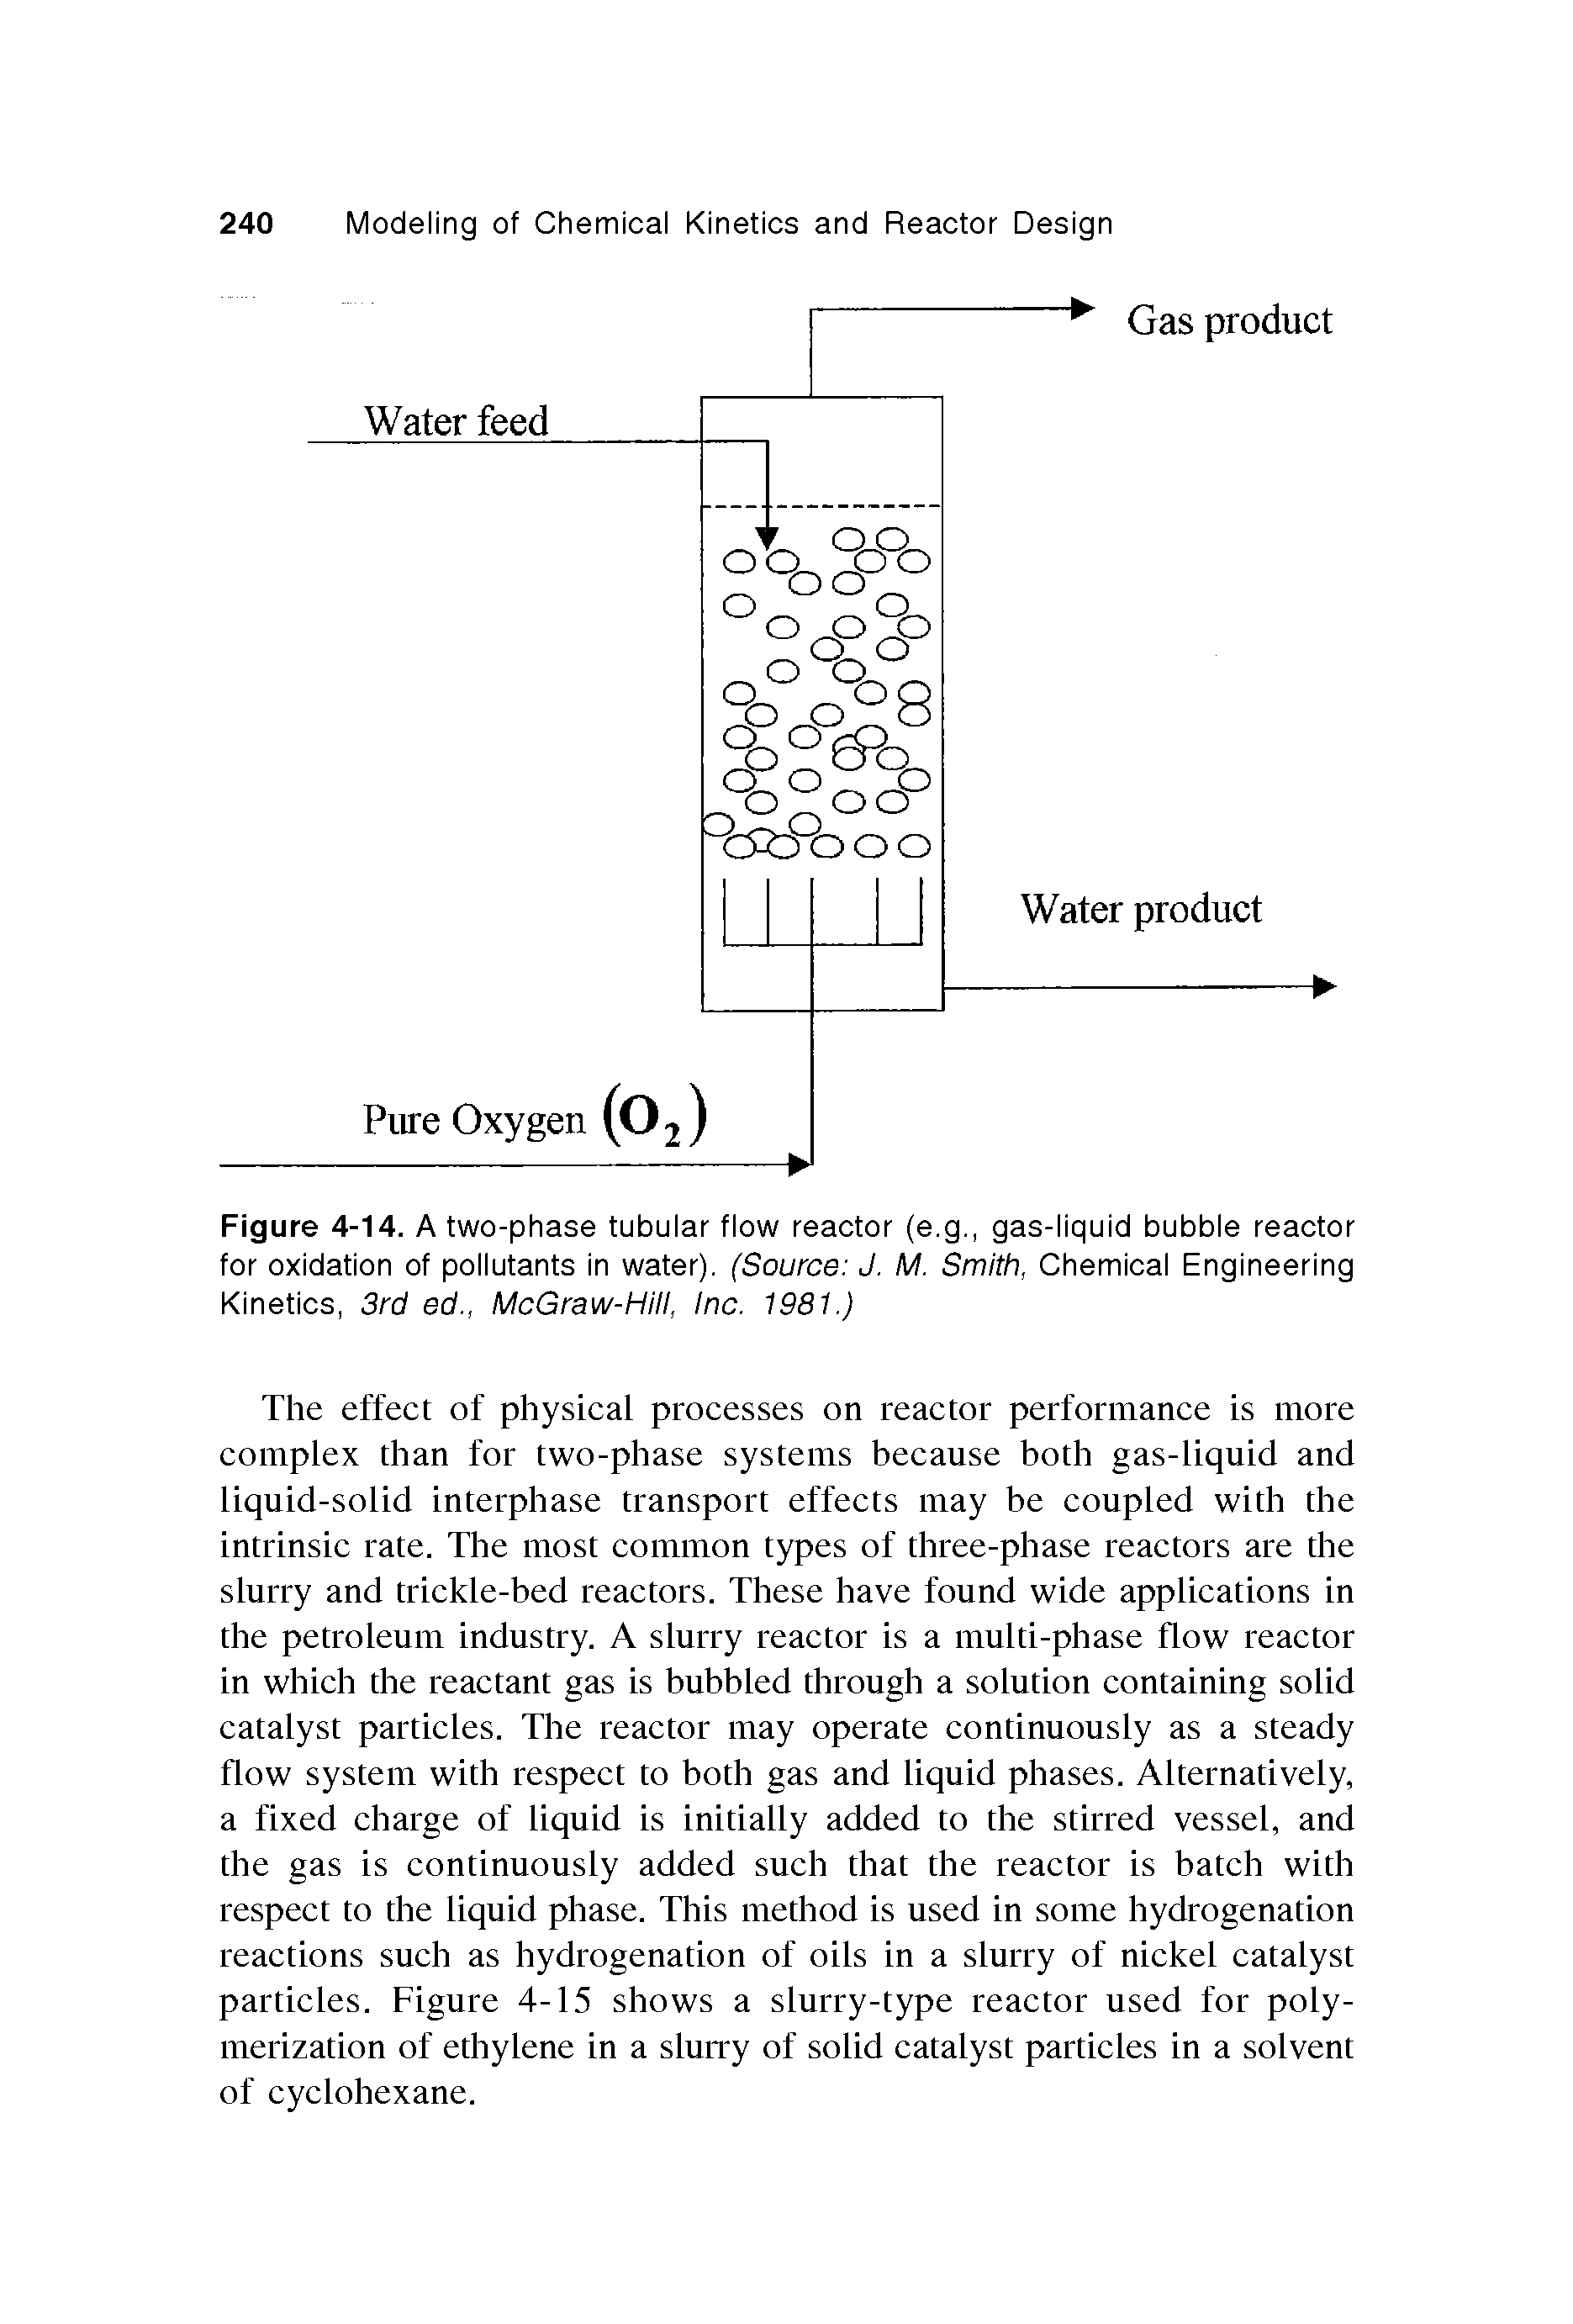 Figure 4-14. A two-phase tubular flow reaotor (e.g., gas-liquid bubble reaotor for oxidation of pollutants in water). (Source J. M. Smith, Chemioal Engineering Kinetios, 3rd ed., McGraw-Hill, Inc. 1981.)...